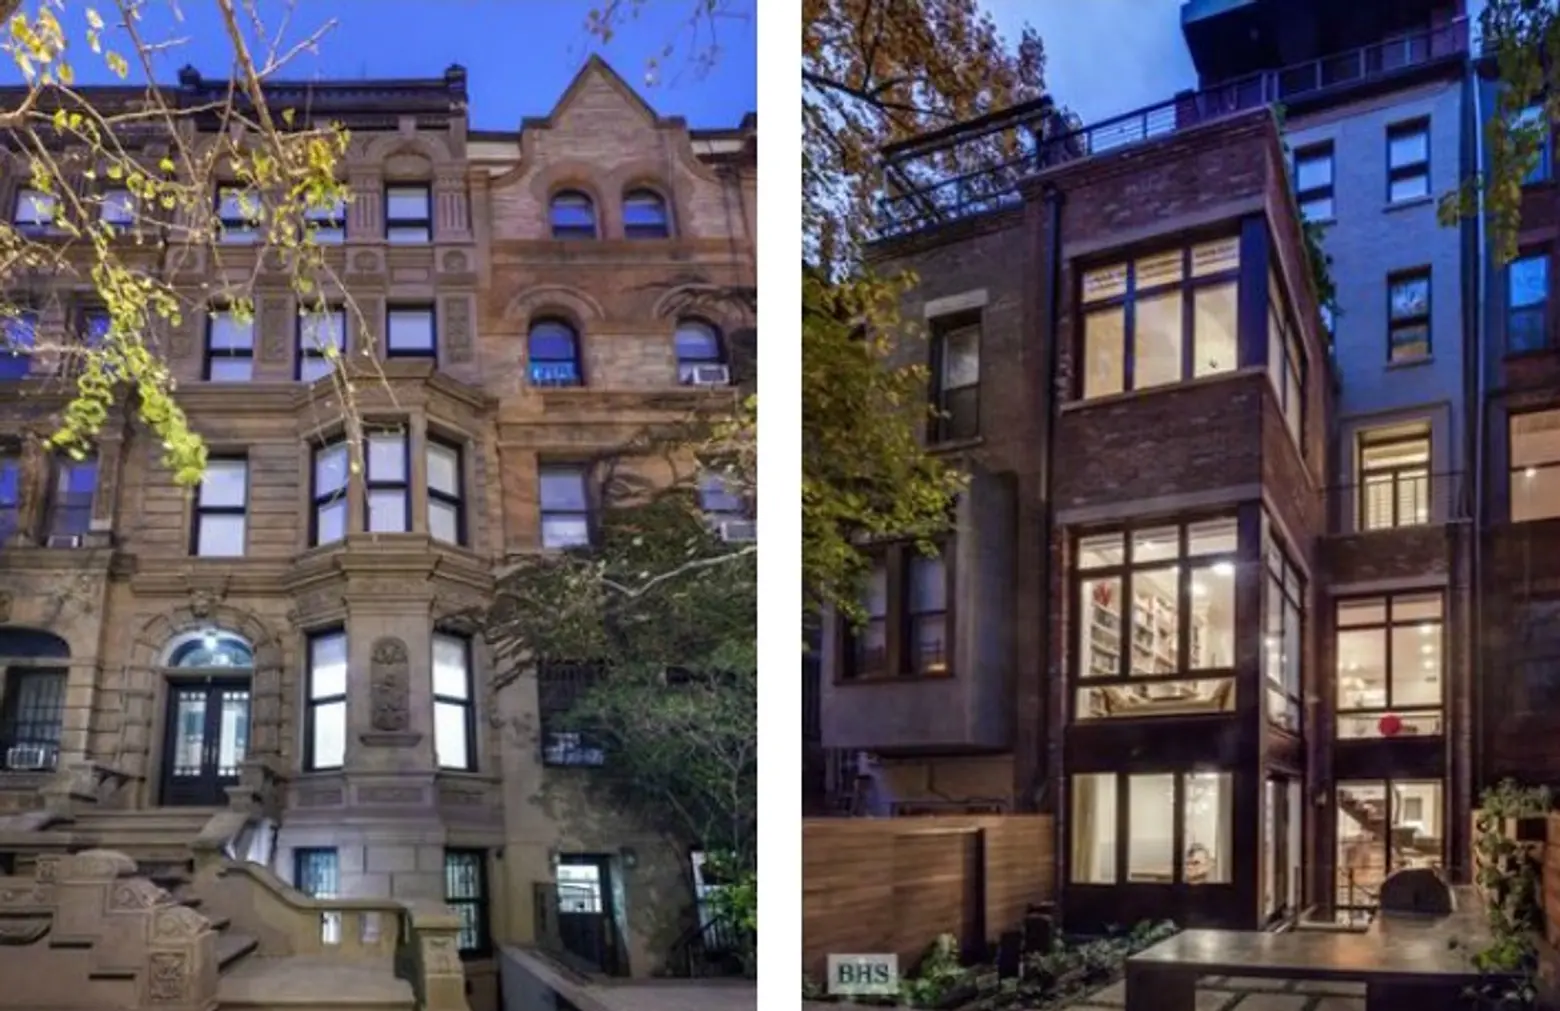 25 West 88th Street, Passive House, LEED certified, Baxt Ingui Architects, Kurt Roeloffs, Interiors, Cool Listings, Architecture, Renovation, Townhouse, Upper West Side, Historic Homes, Robert Taffera Construction